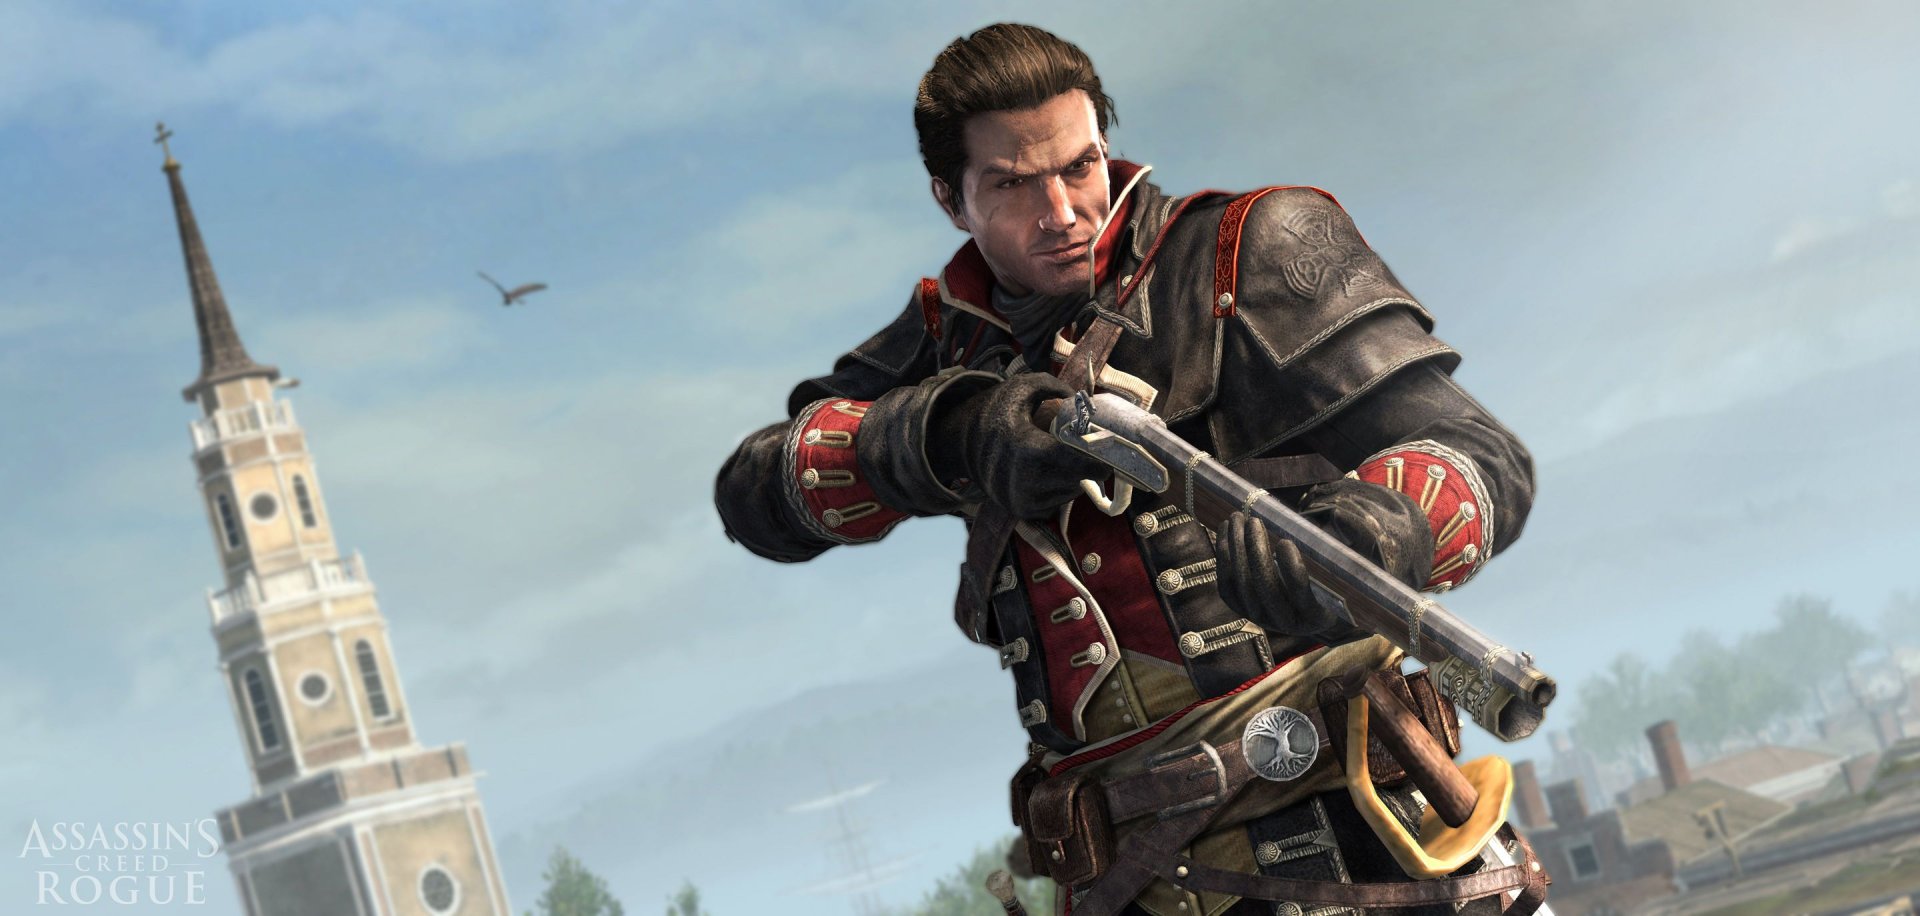 Video Game Assassin's Creed: Rogue Wallpaper